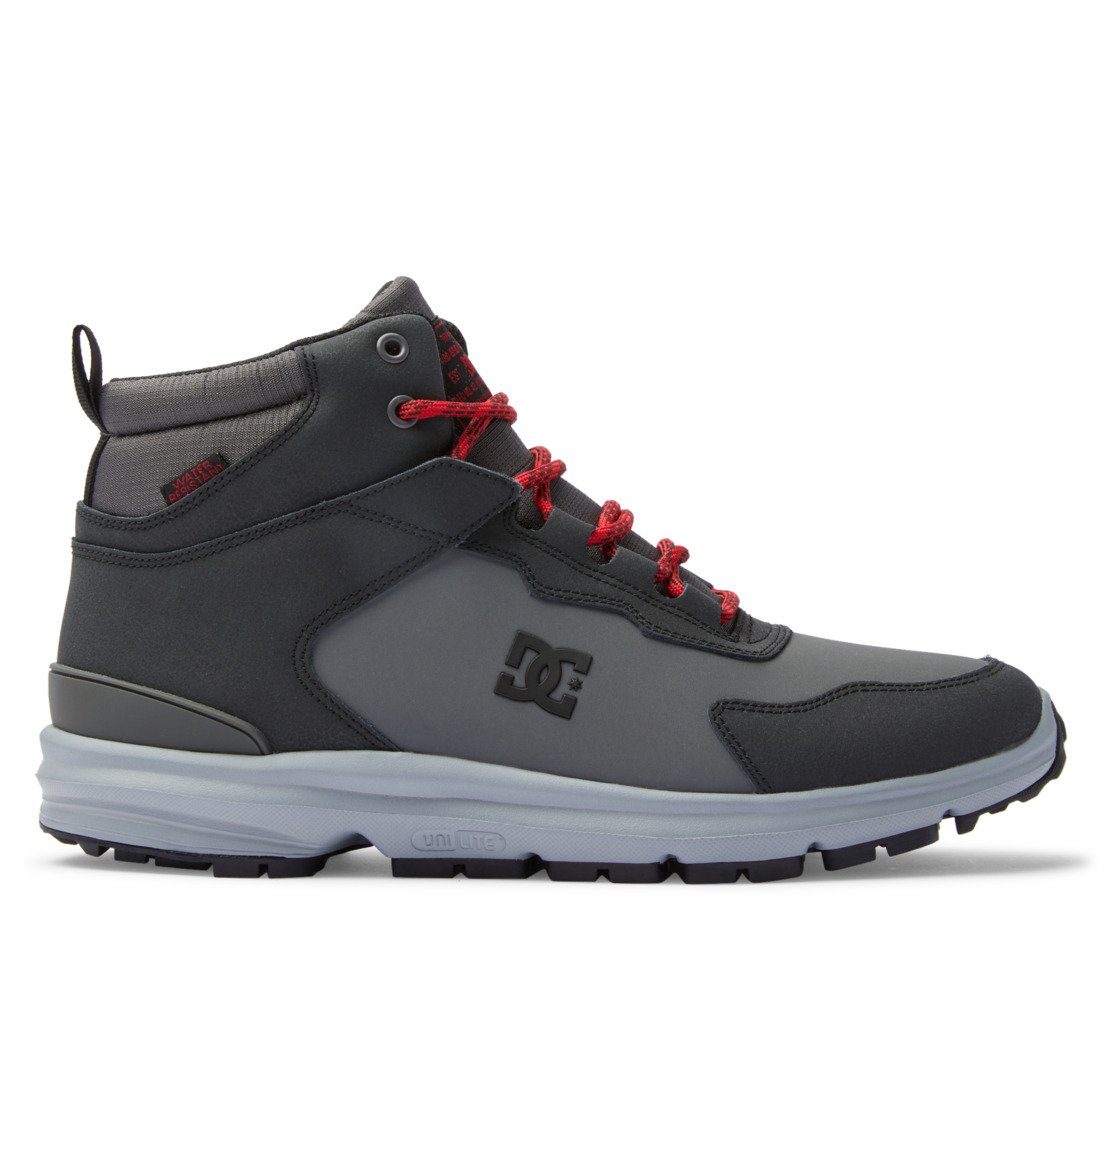 Grey/Black/Red Stiefel Shoes DC Mutiny